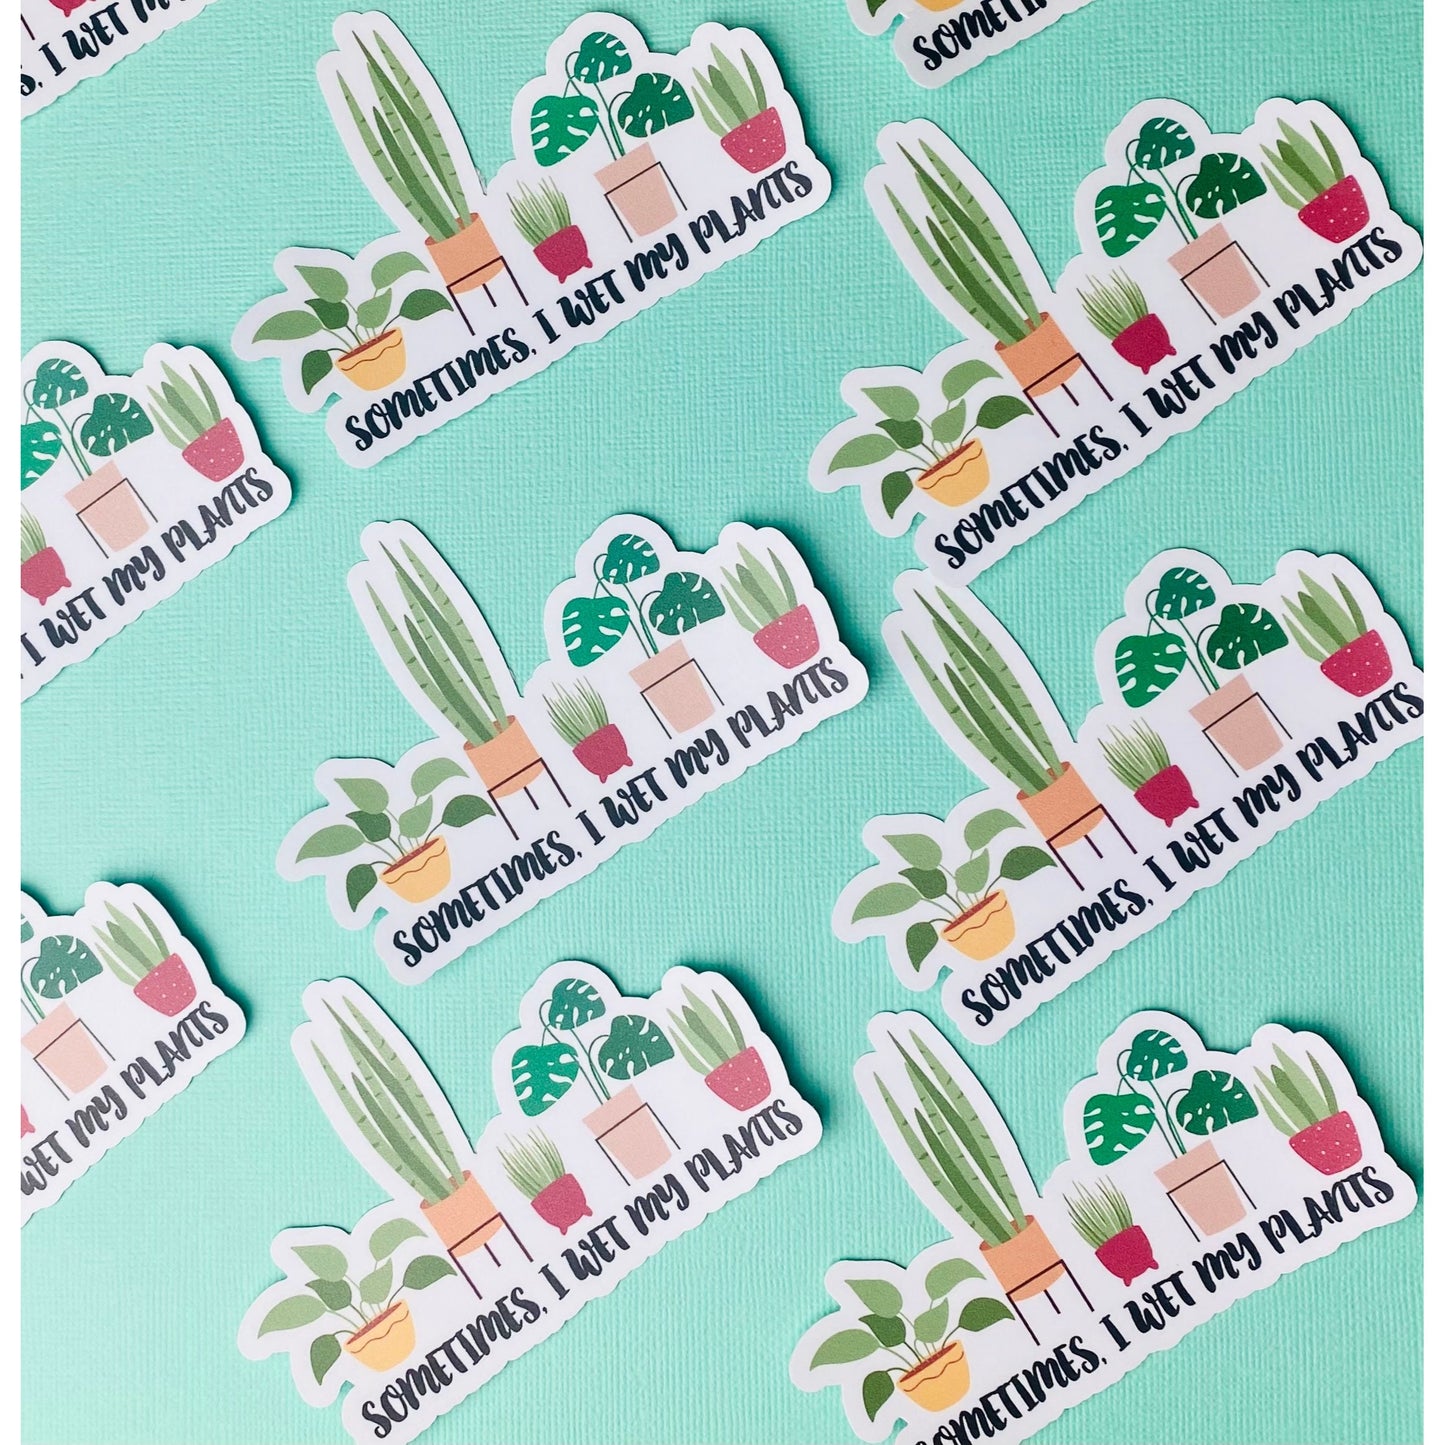 Wet My Plants Sticker, Funny Sticker for plant lovers, plant mom, houseplants, plant decals